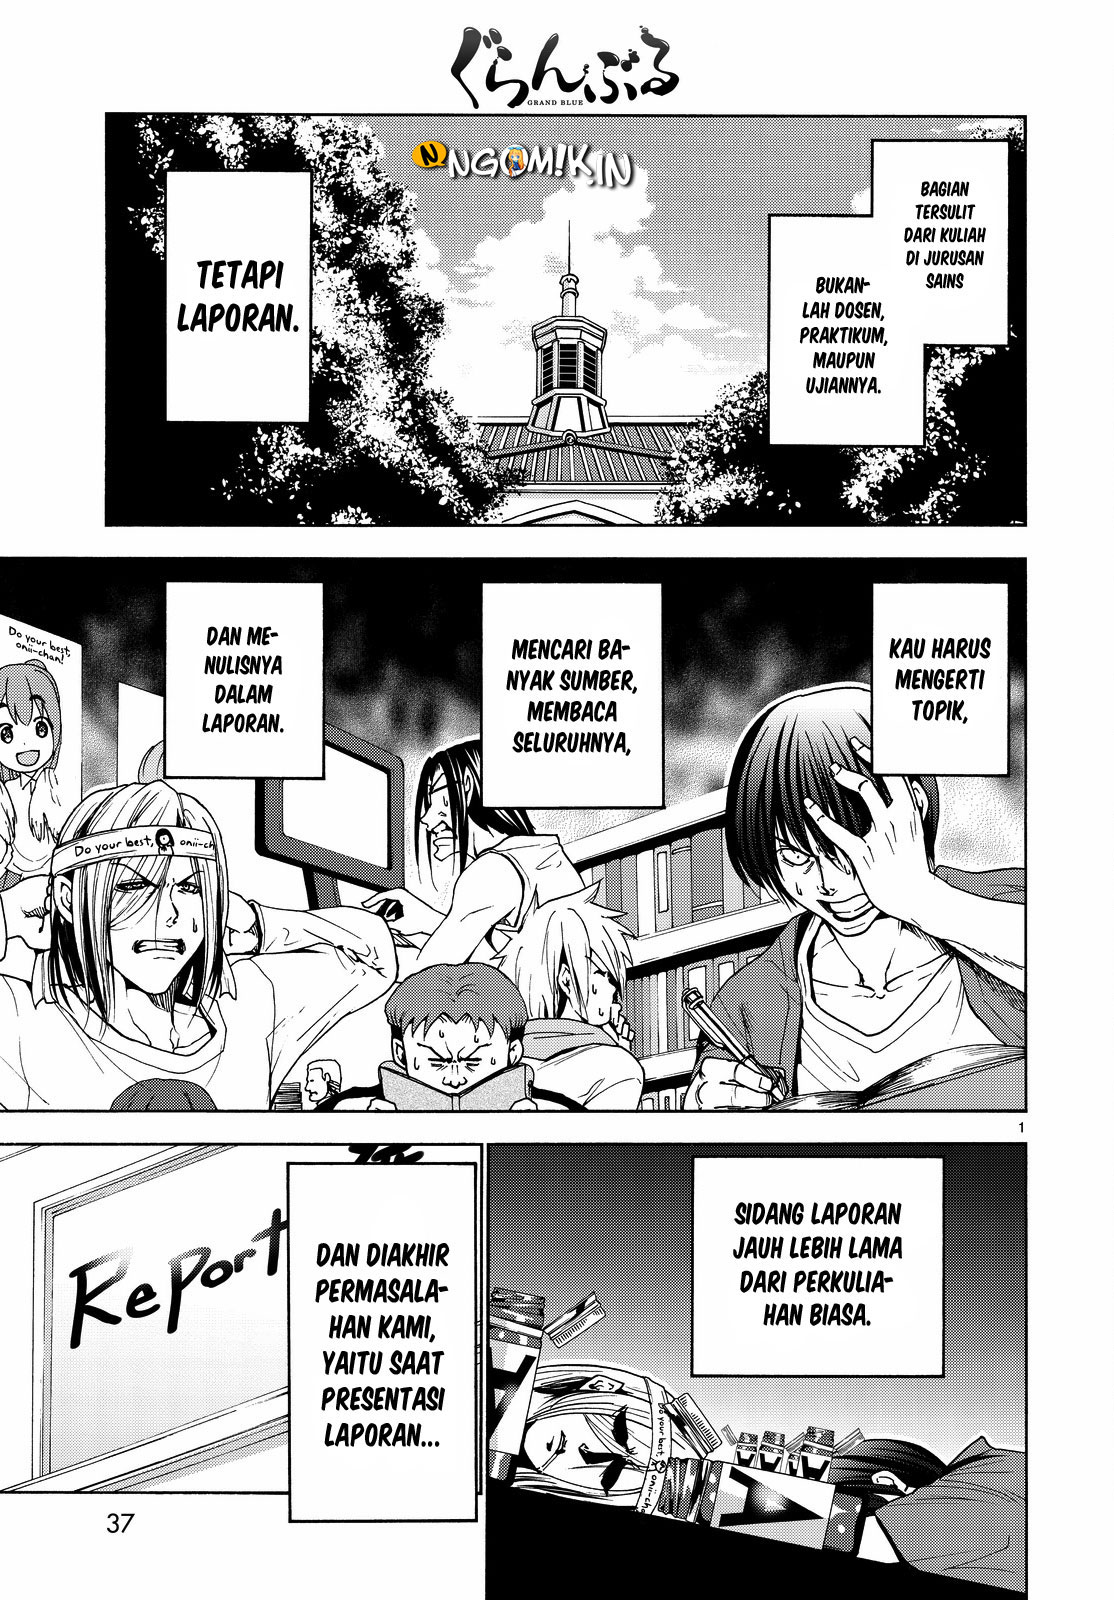 Grand Blue Chapter 31